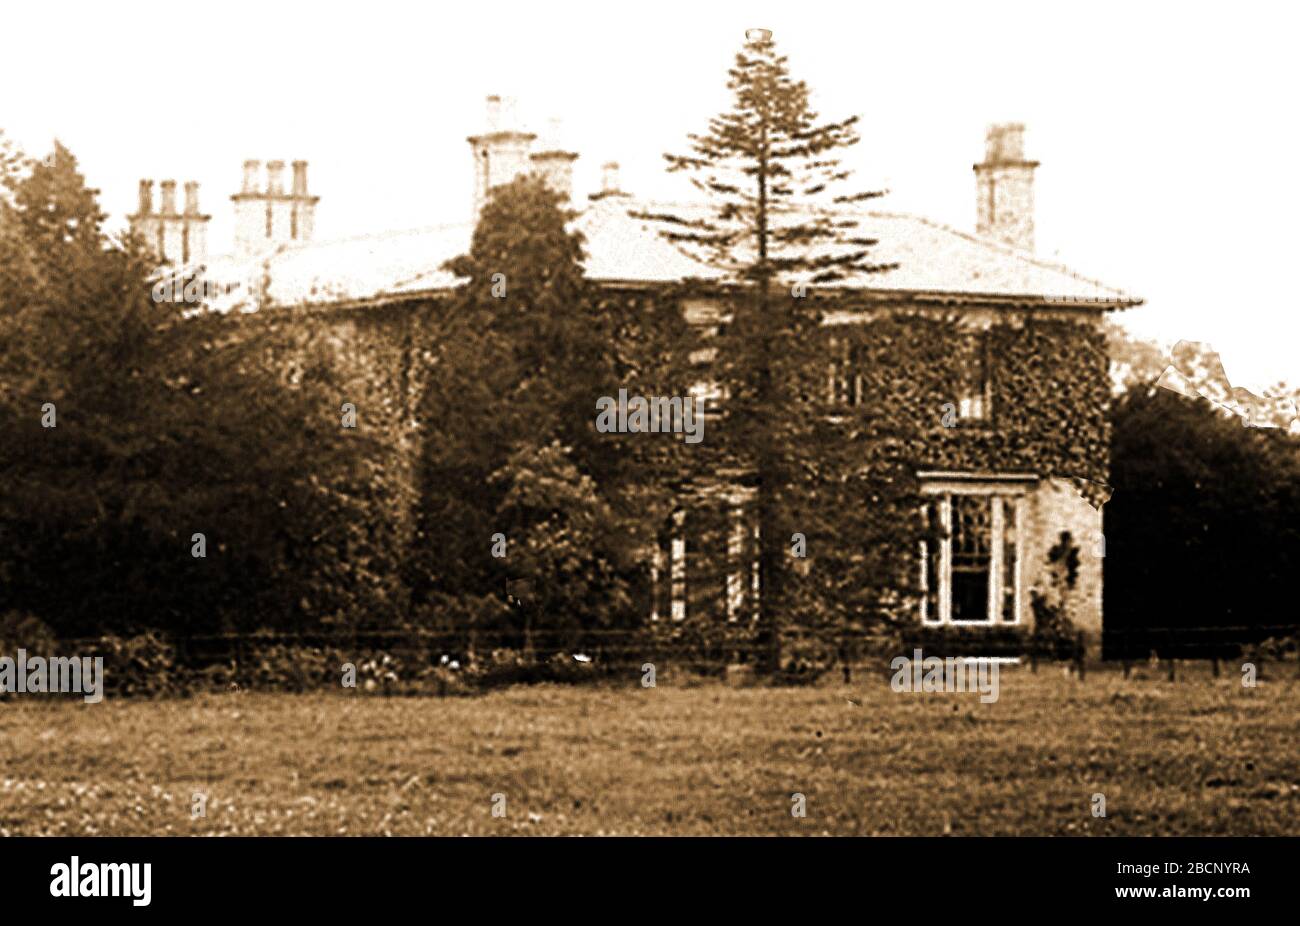 A rare of snapshot of The house at Riby Grove Lincolnshire, England (demolished 1935) - The country house,  stood in the village. In 1803 Marmaduke Tomline, owner of the Riby Grove, bequeathed the house and estate to George Pretyman, ( Bishop of Lincoln), on condition that he adopted the name Tomline. Pretyman accepted the inheritance and became George Pretyman-Tomline - Bishop Tomline was William Pitt’s tutor, secretary, confidant and future biographer Stock Photo